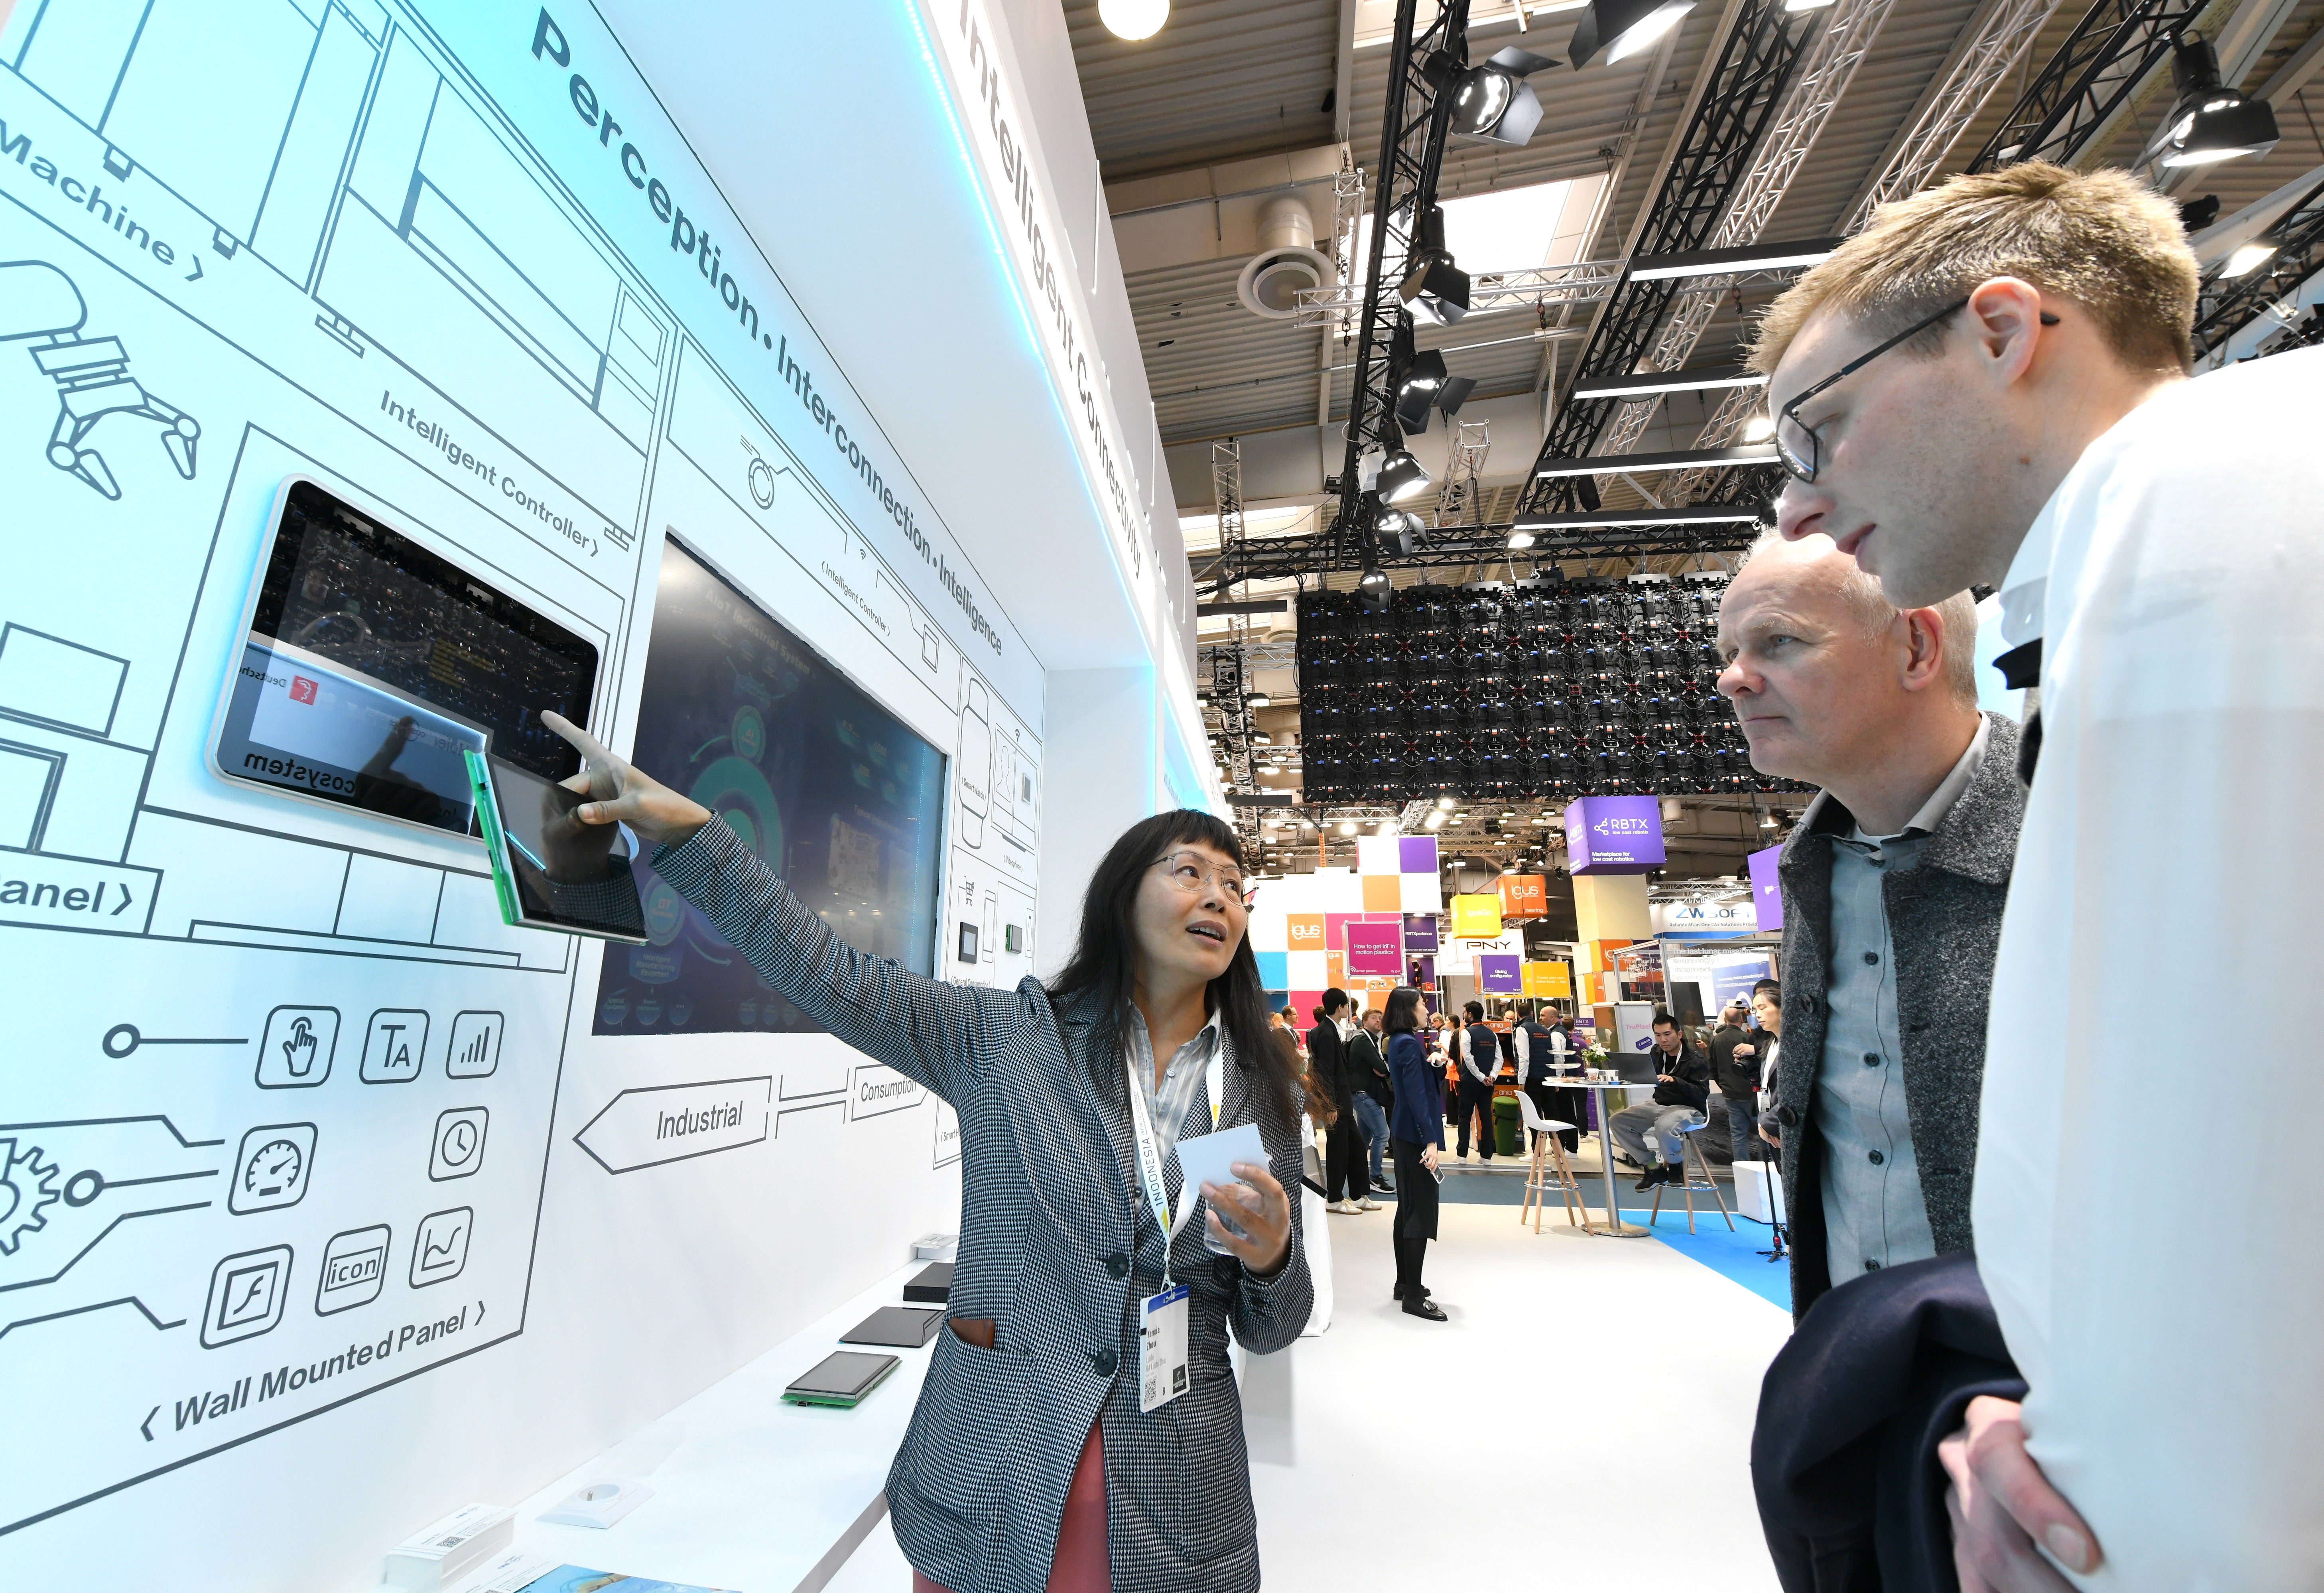 Visitors learn about the intelligent solutions at the booth of COSMOPlat, an industrial internet platform under home appliance manufacturer Haier Group, during the Hannover Messe in Hannover, Germany